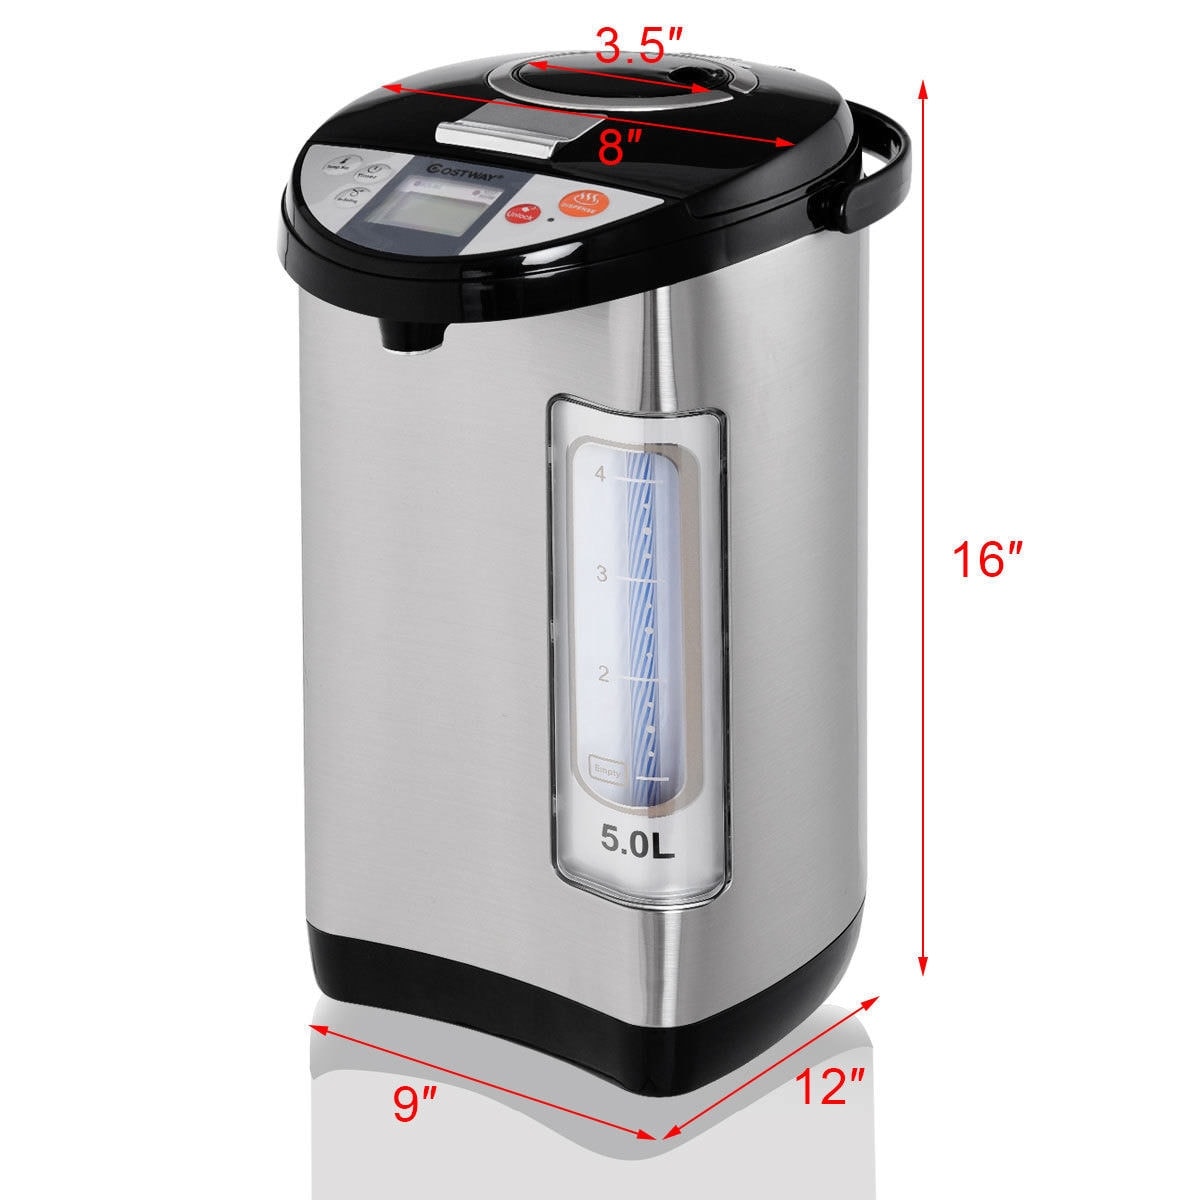 Costway 5-Liter LCD Water Boiler and Warmer Electric Hot Pot